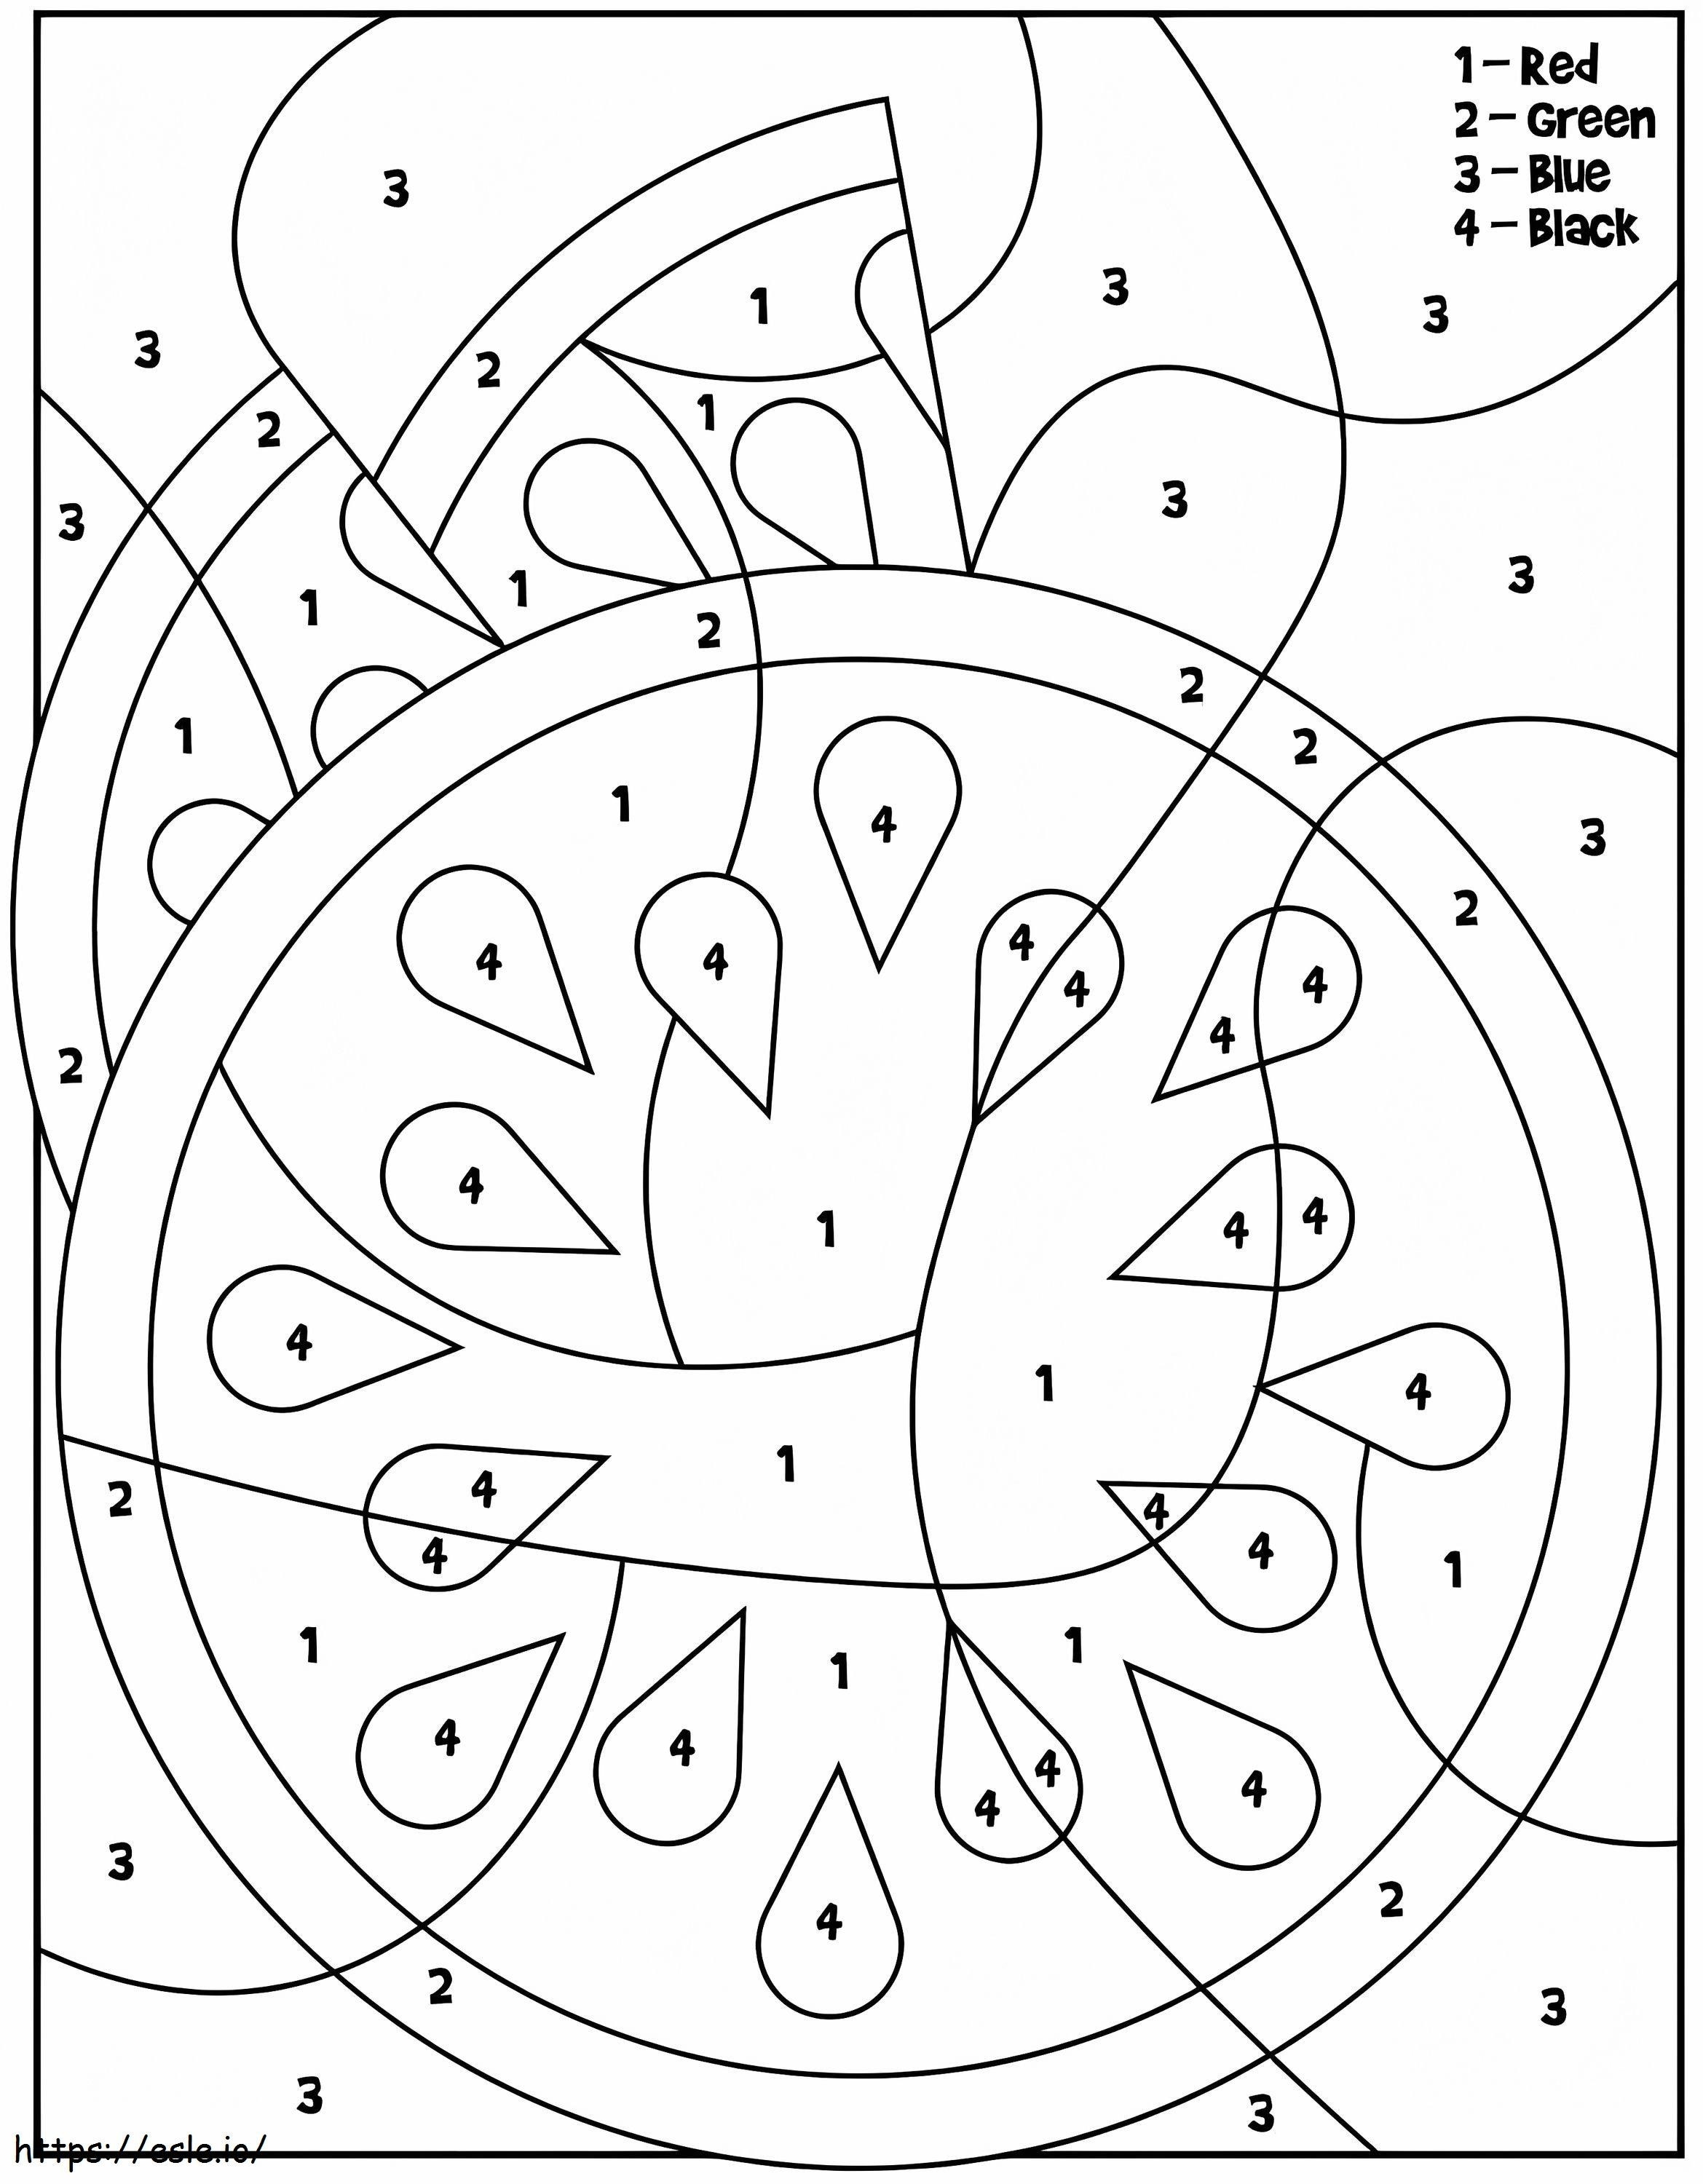 Watermelon Color By Number coloring page